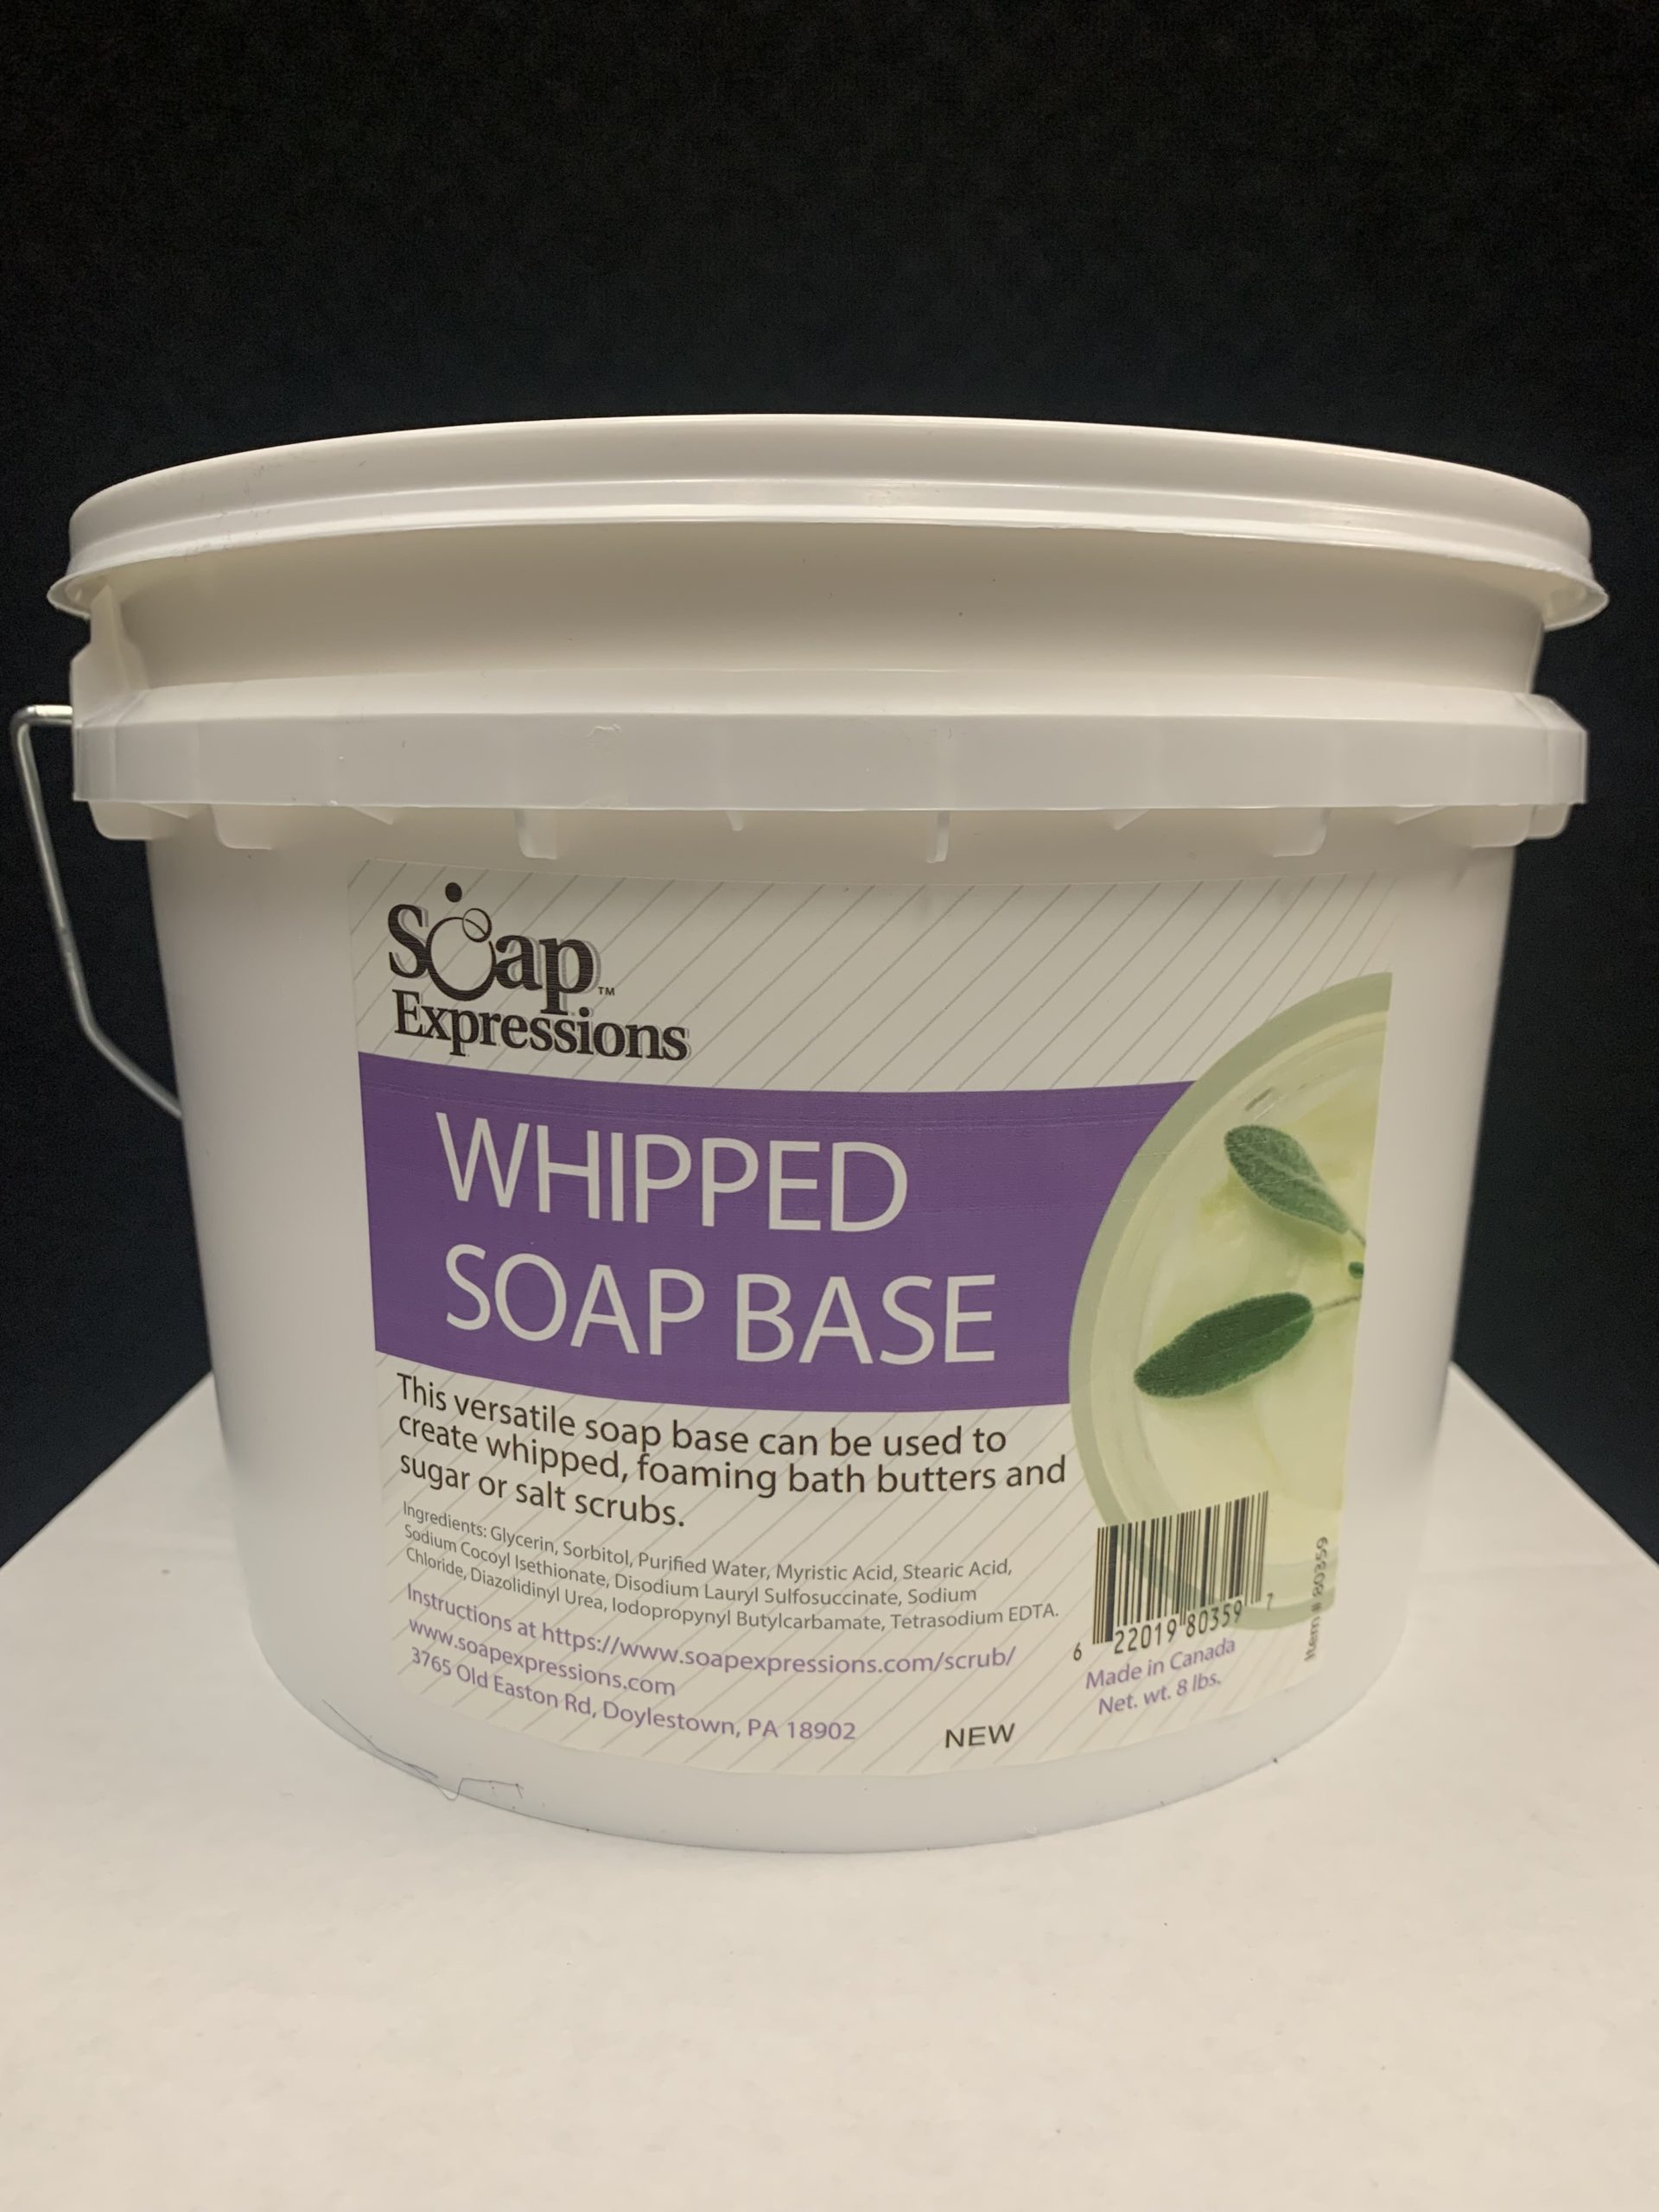 How to make 'Whipped Soap' without a base, Basic Recipe